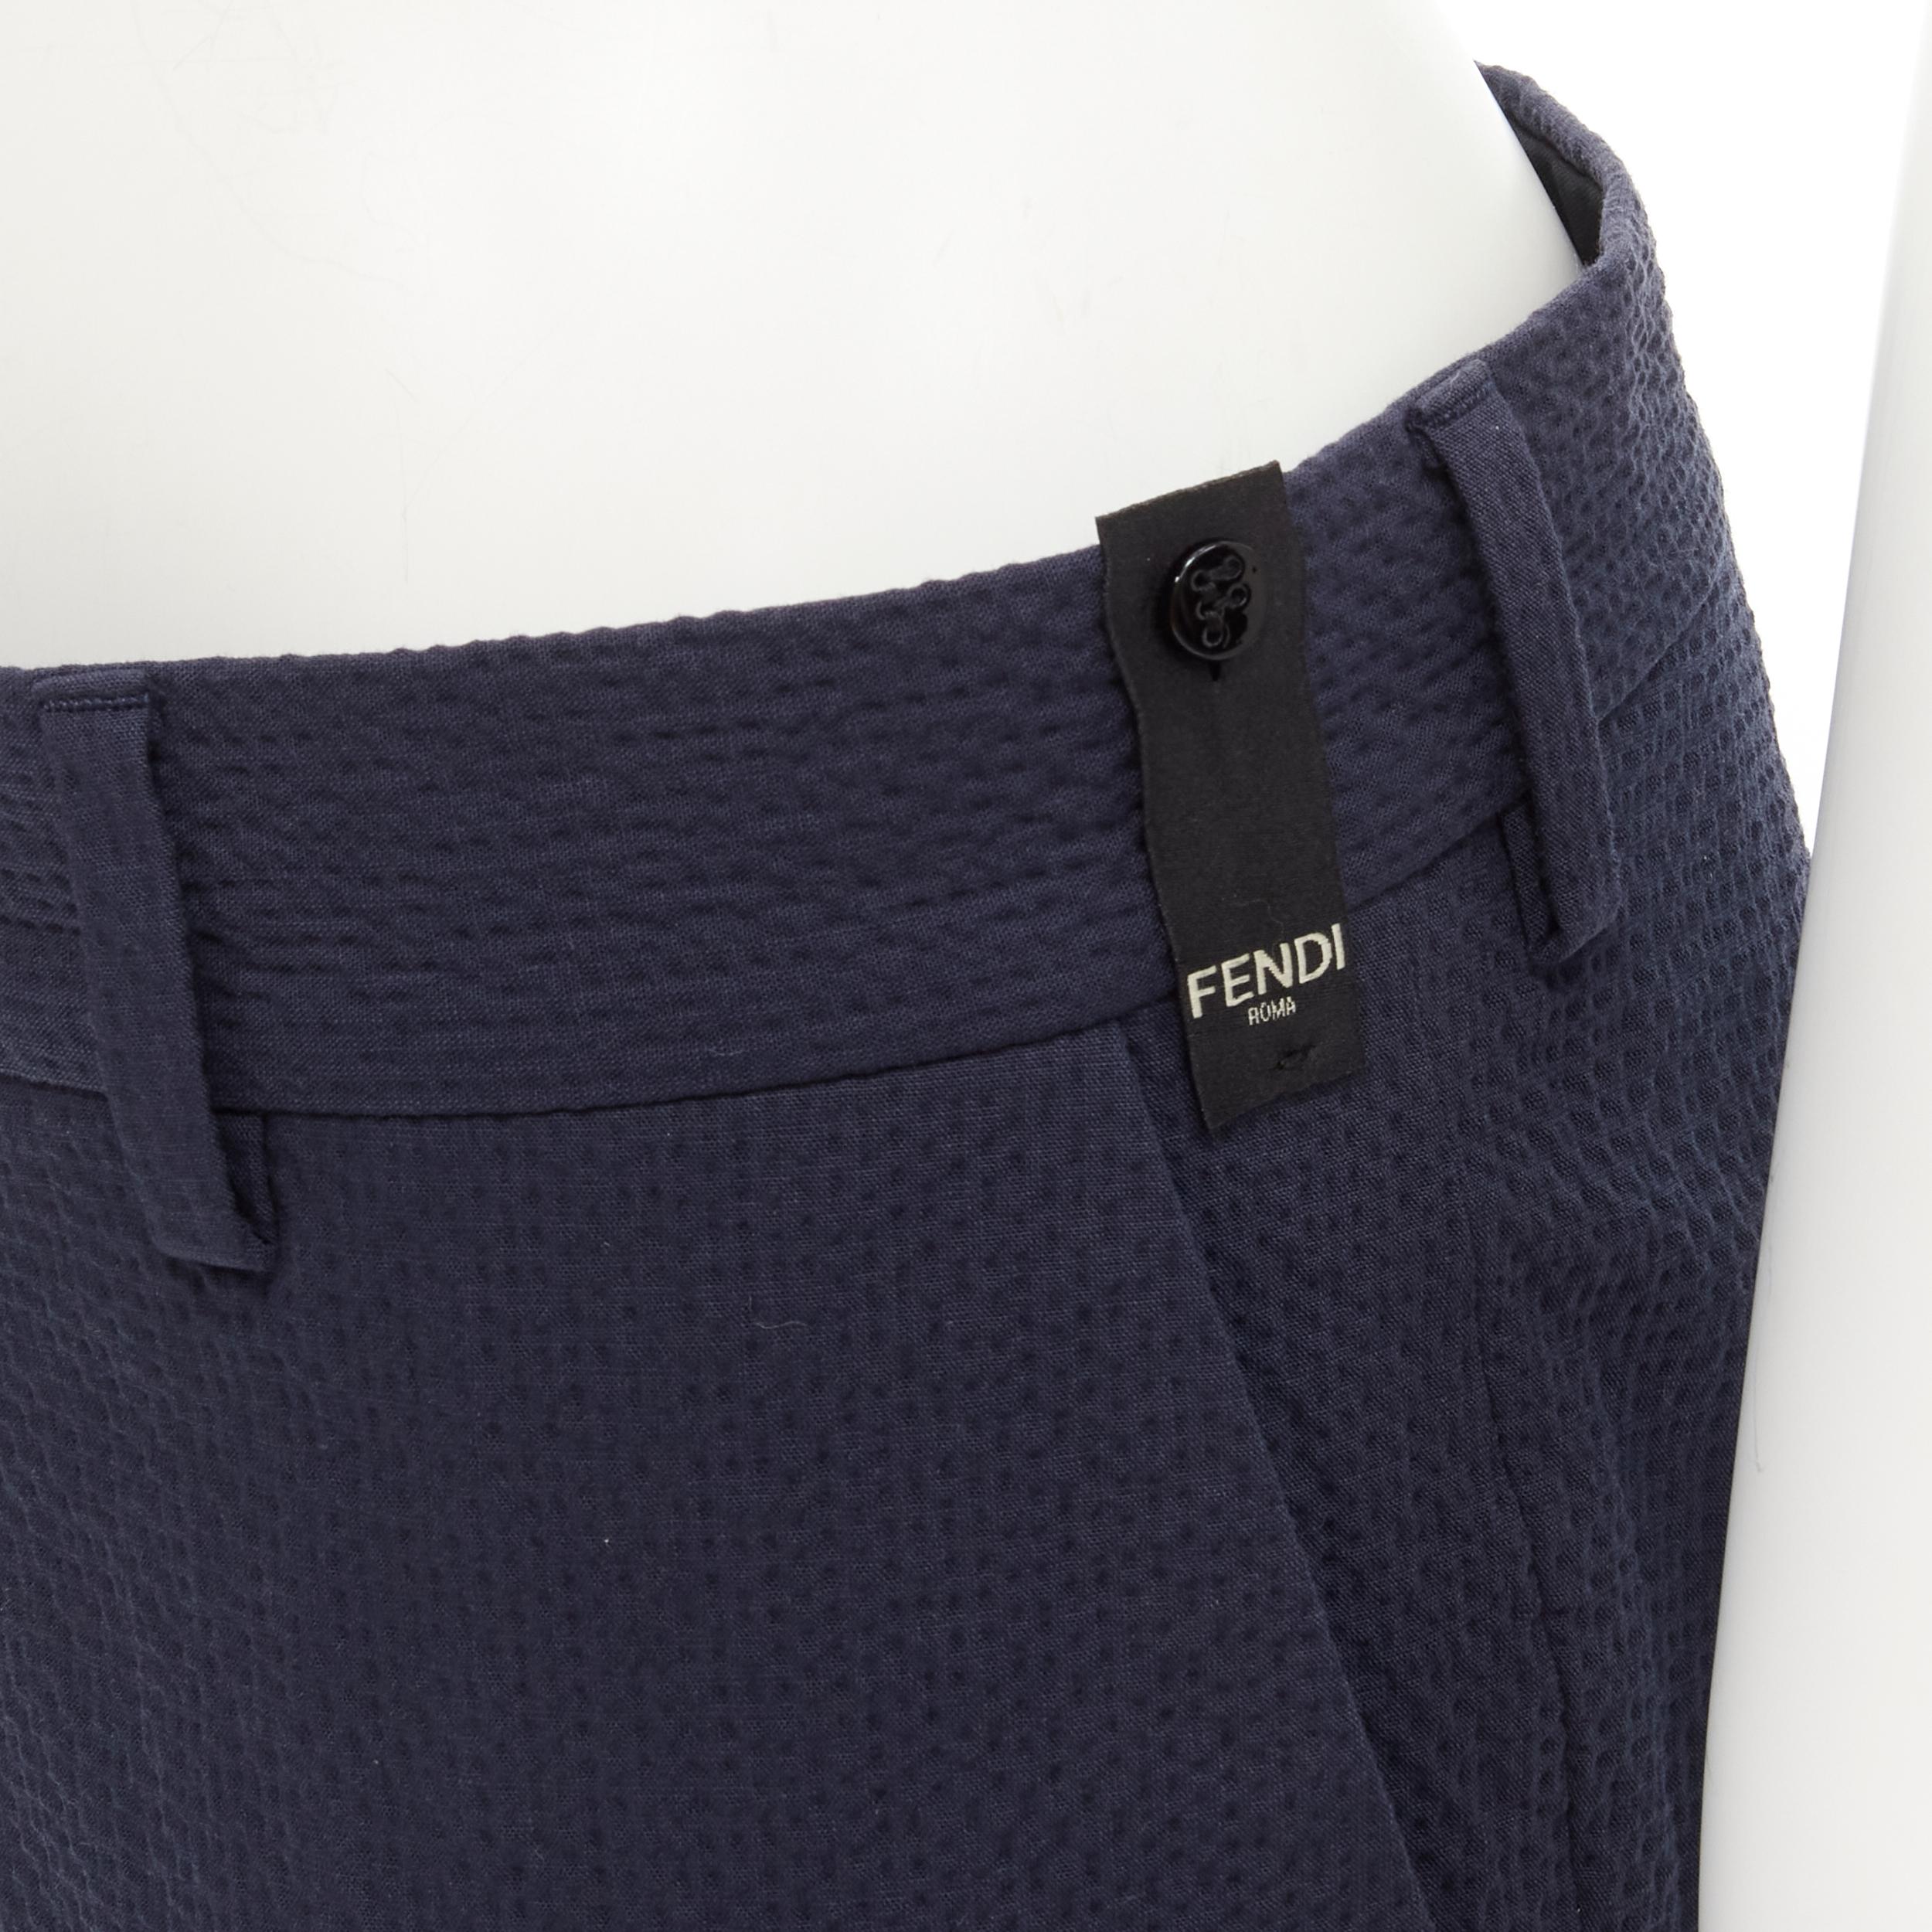 FENDI navy blue seersucker cotton blend trousers pants IT44 XS 
Reference: CRTI/A00731 
Brand: Fendi 
Material: Cotton 
Color: Blue 
Pattern: Solid 
Closure: Zip 
Made in: Italy 

CONDITION: 
Condition: Excellent, this item was pre-owned and is in